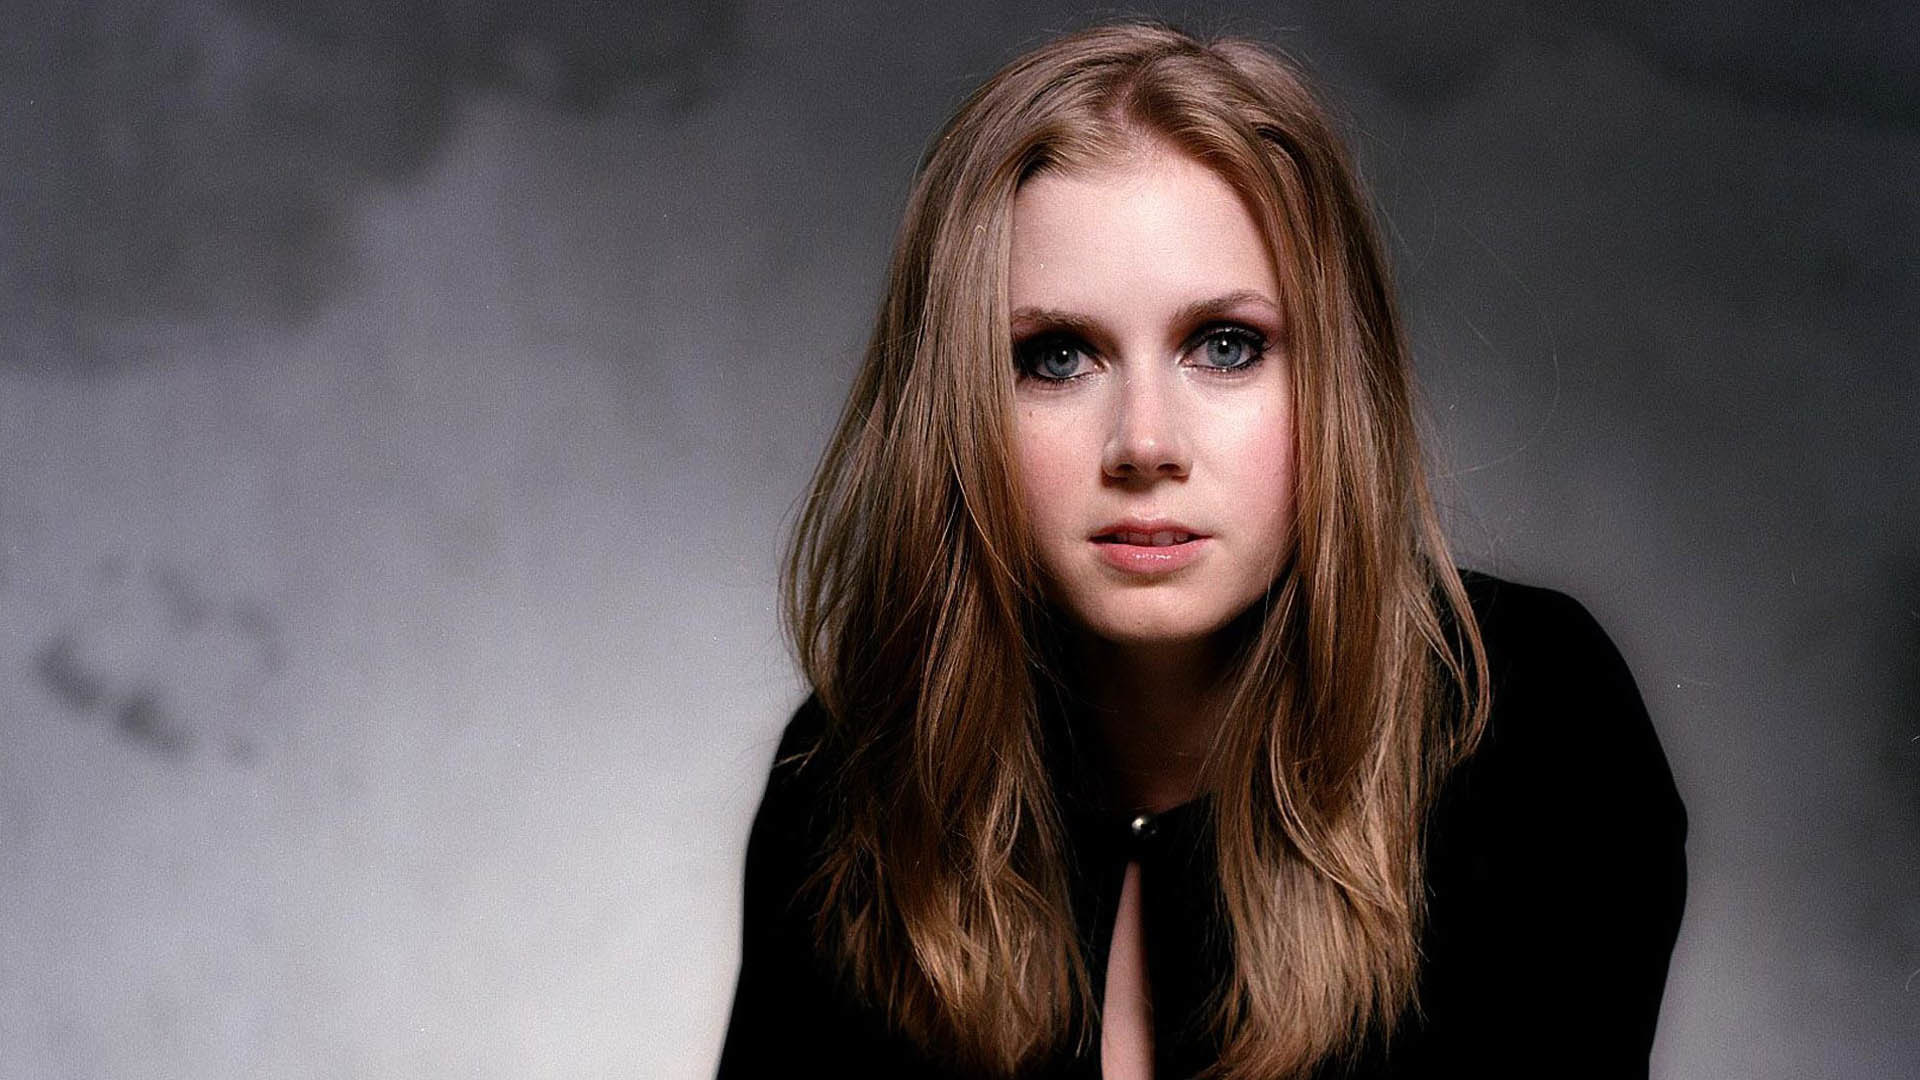 1920x1080 Amy Adams Wallpapers, Photos & Images in ...